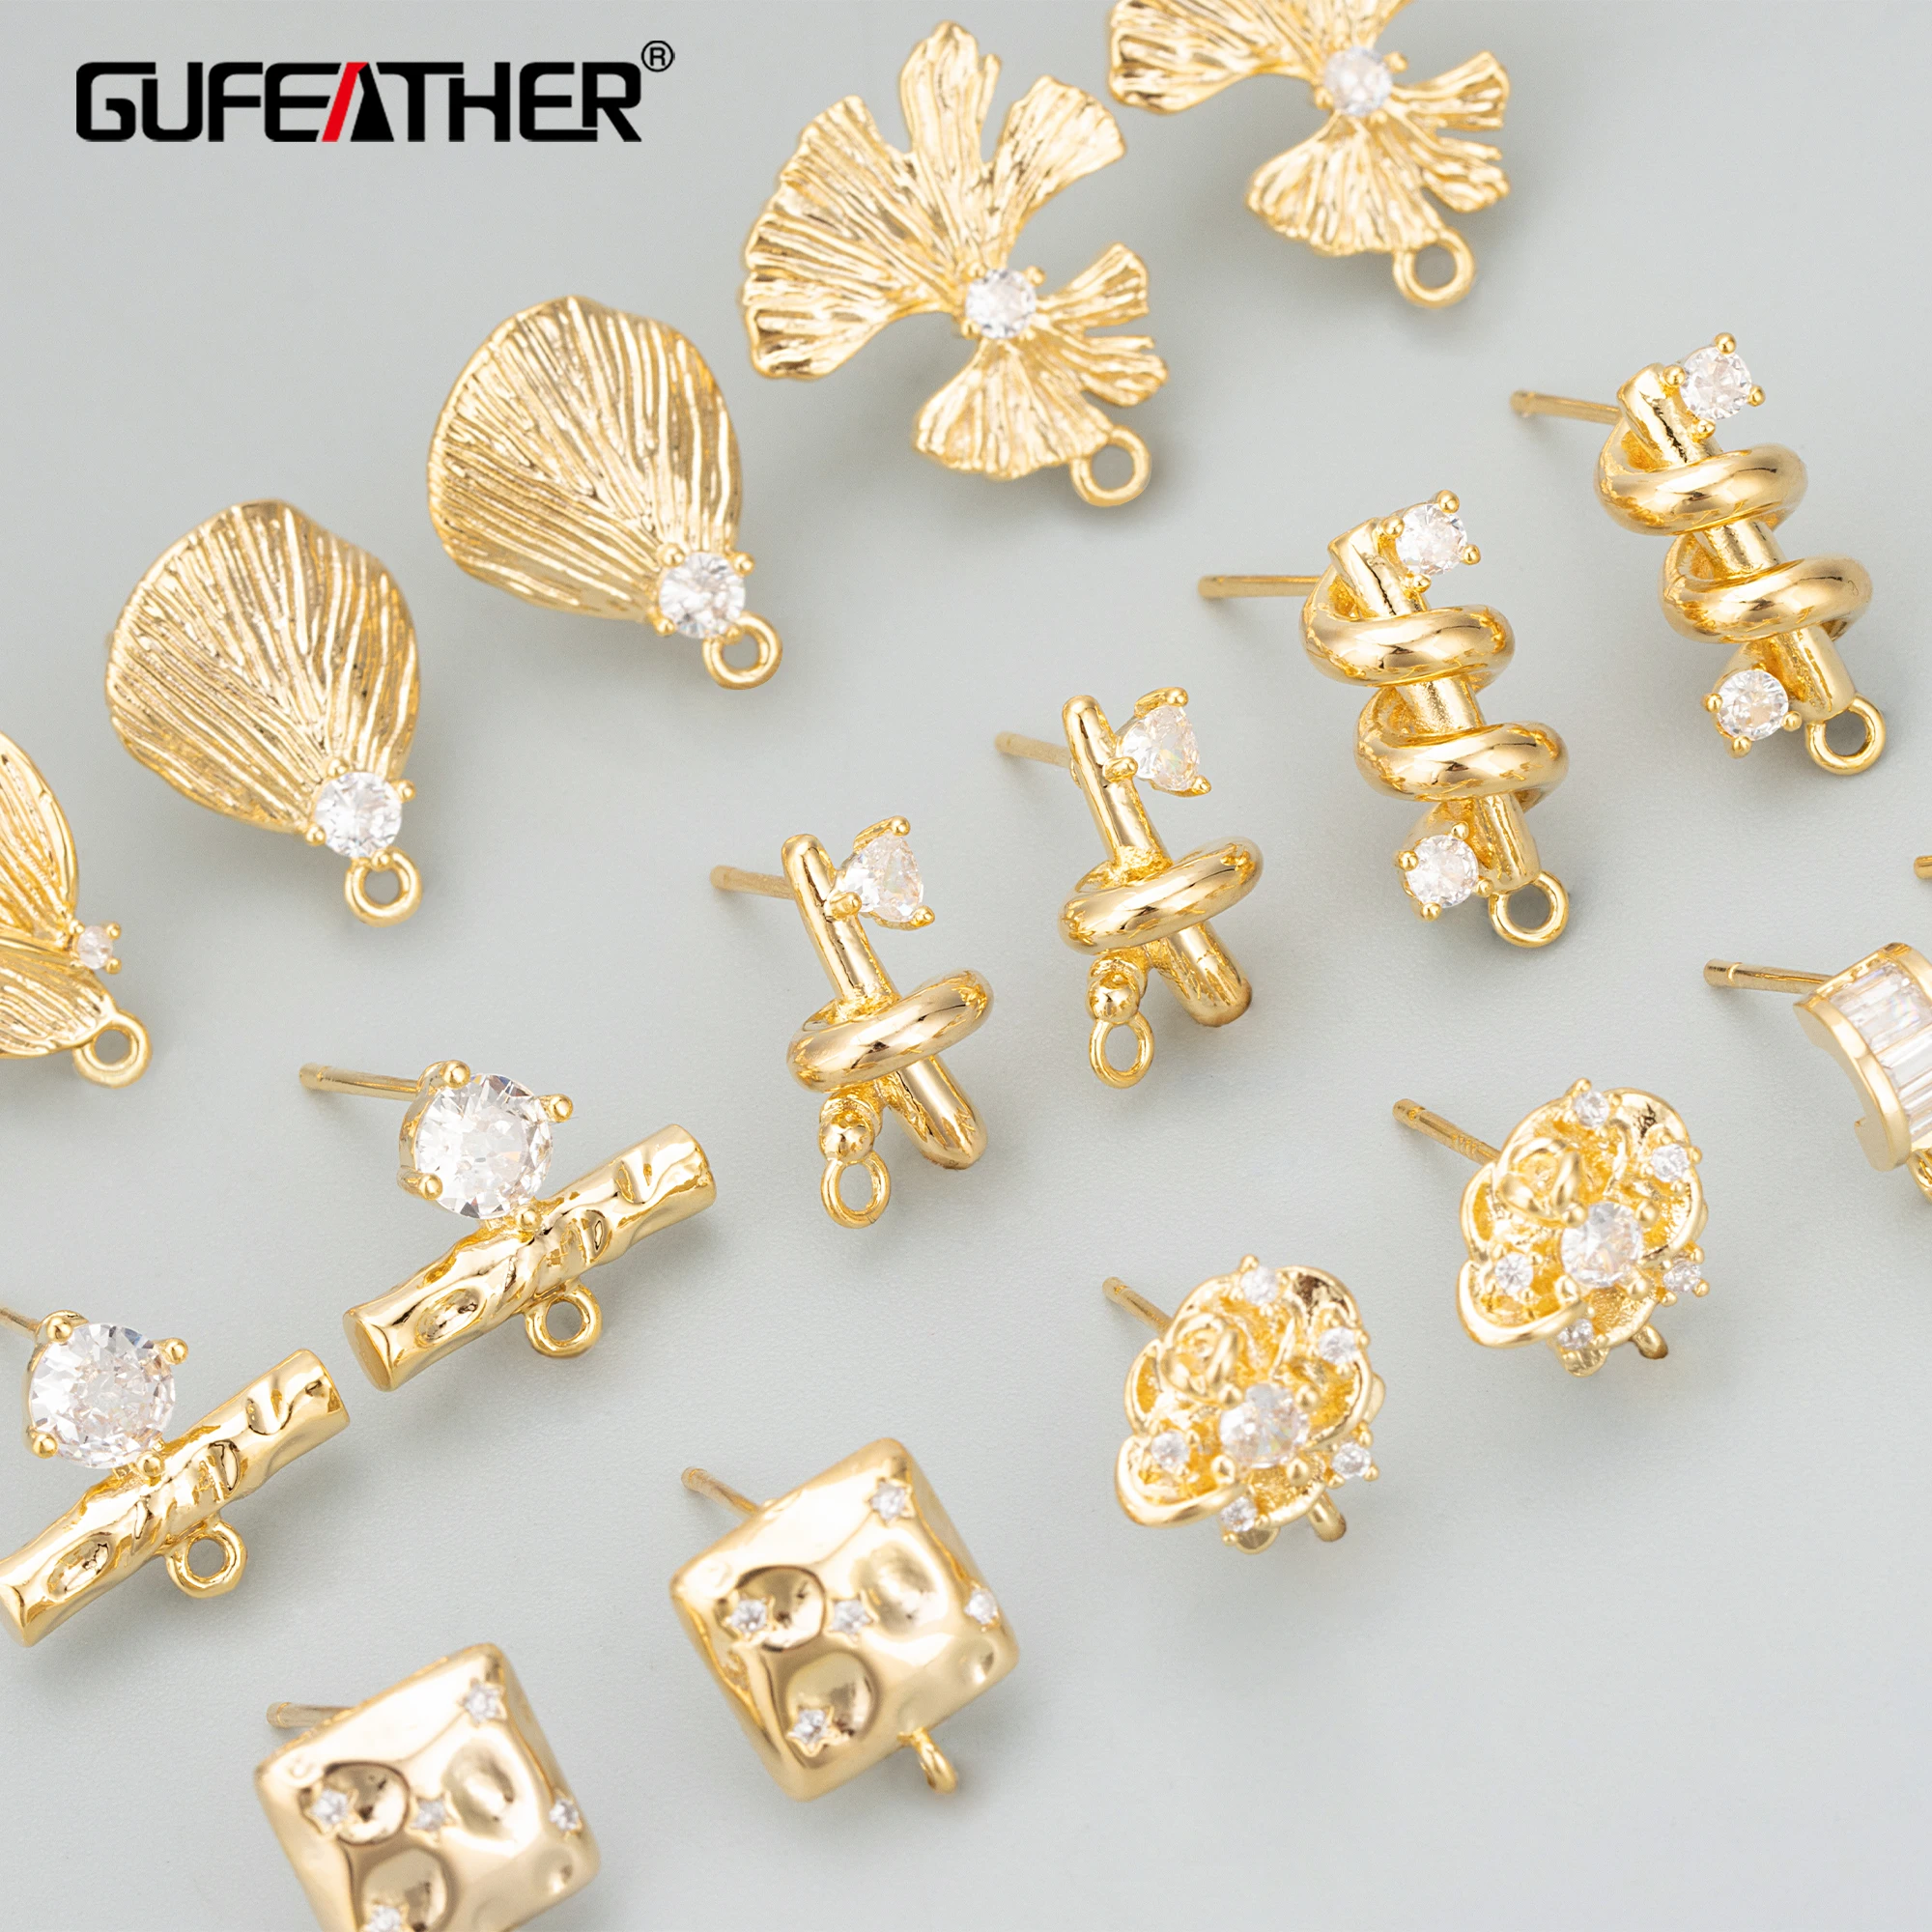 

GUFEATHER ME47,jewelry accessories,18k gold rhodium plated,copper,nickel free,hand made,diy earrings,jewelry making,6pcs/lot